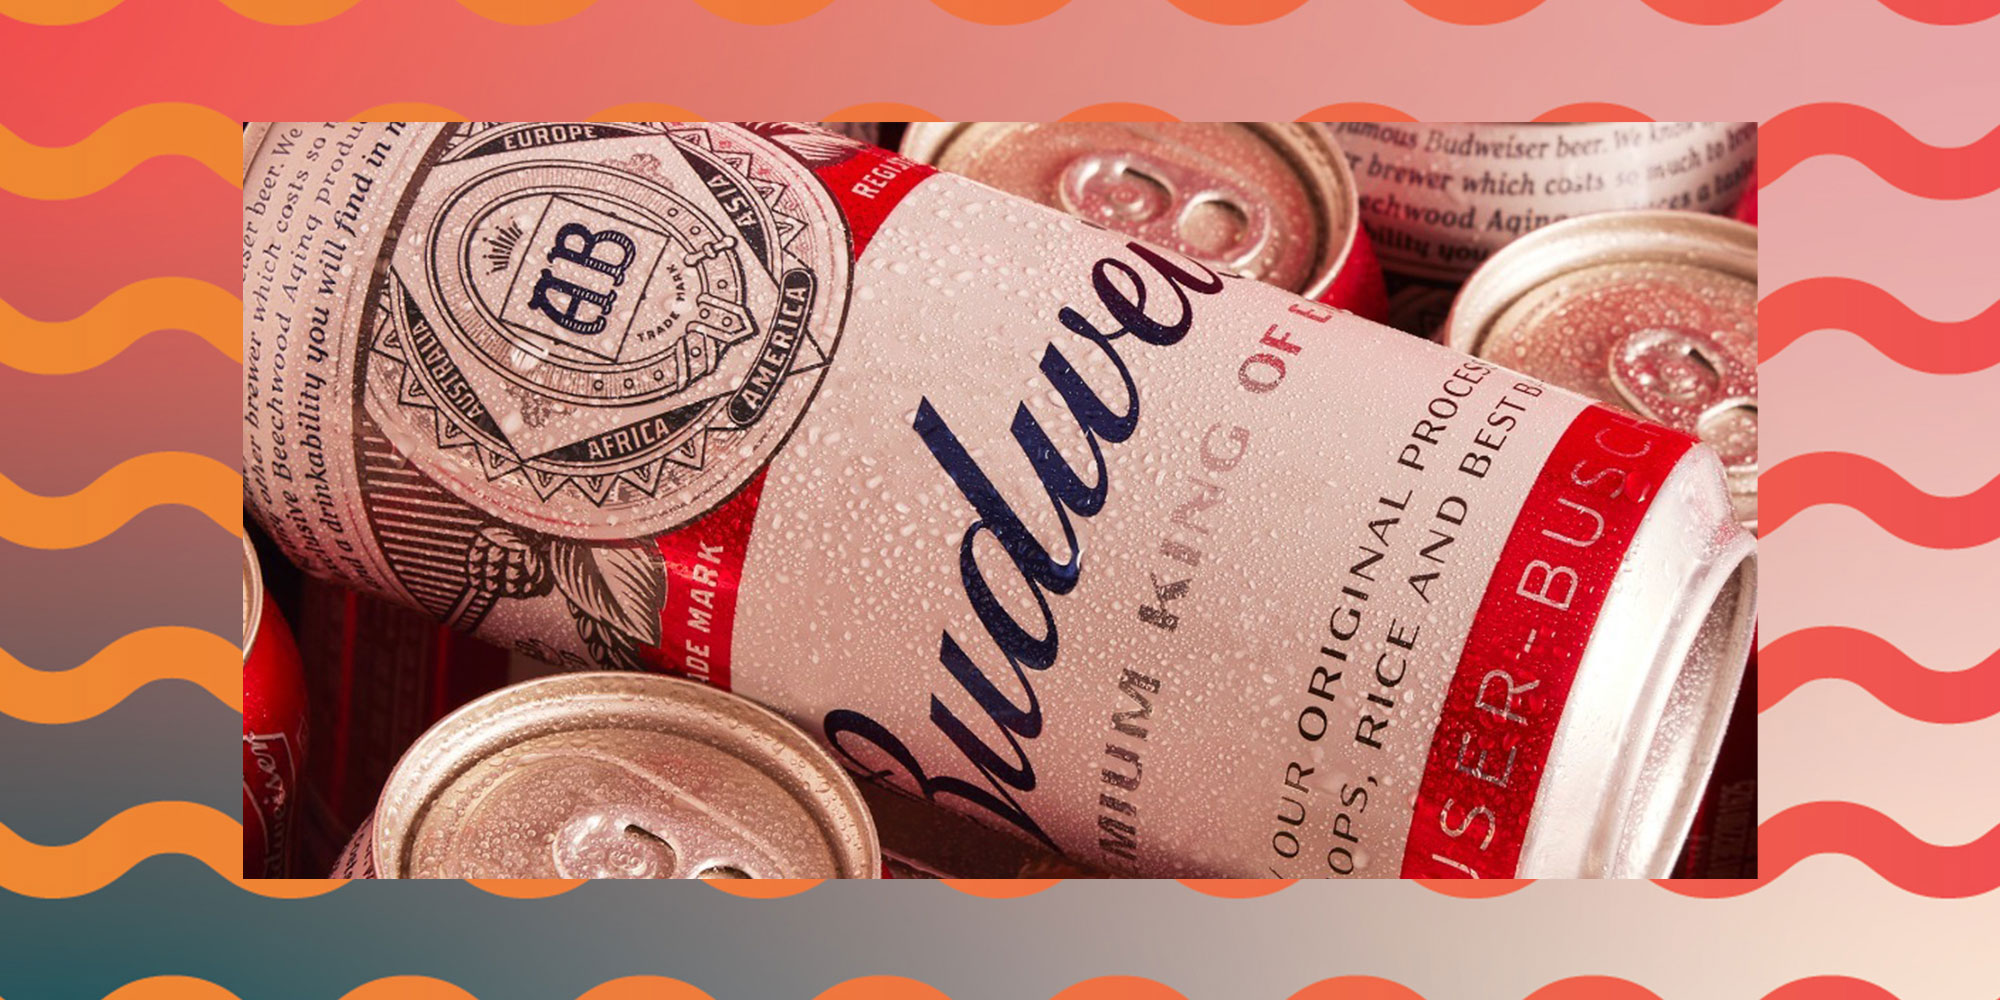 The Top 5 Biggest Beverage Companies in the World